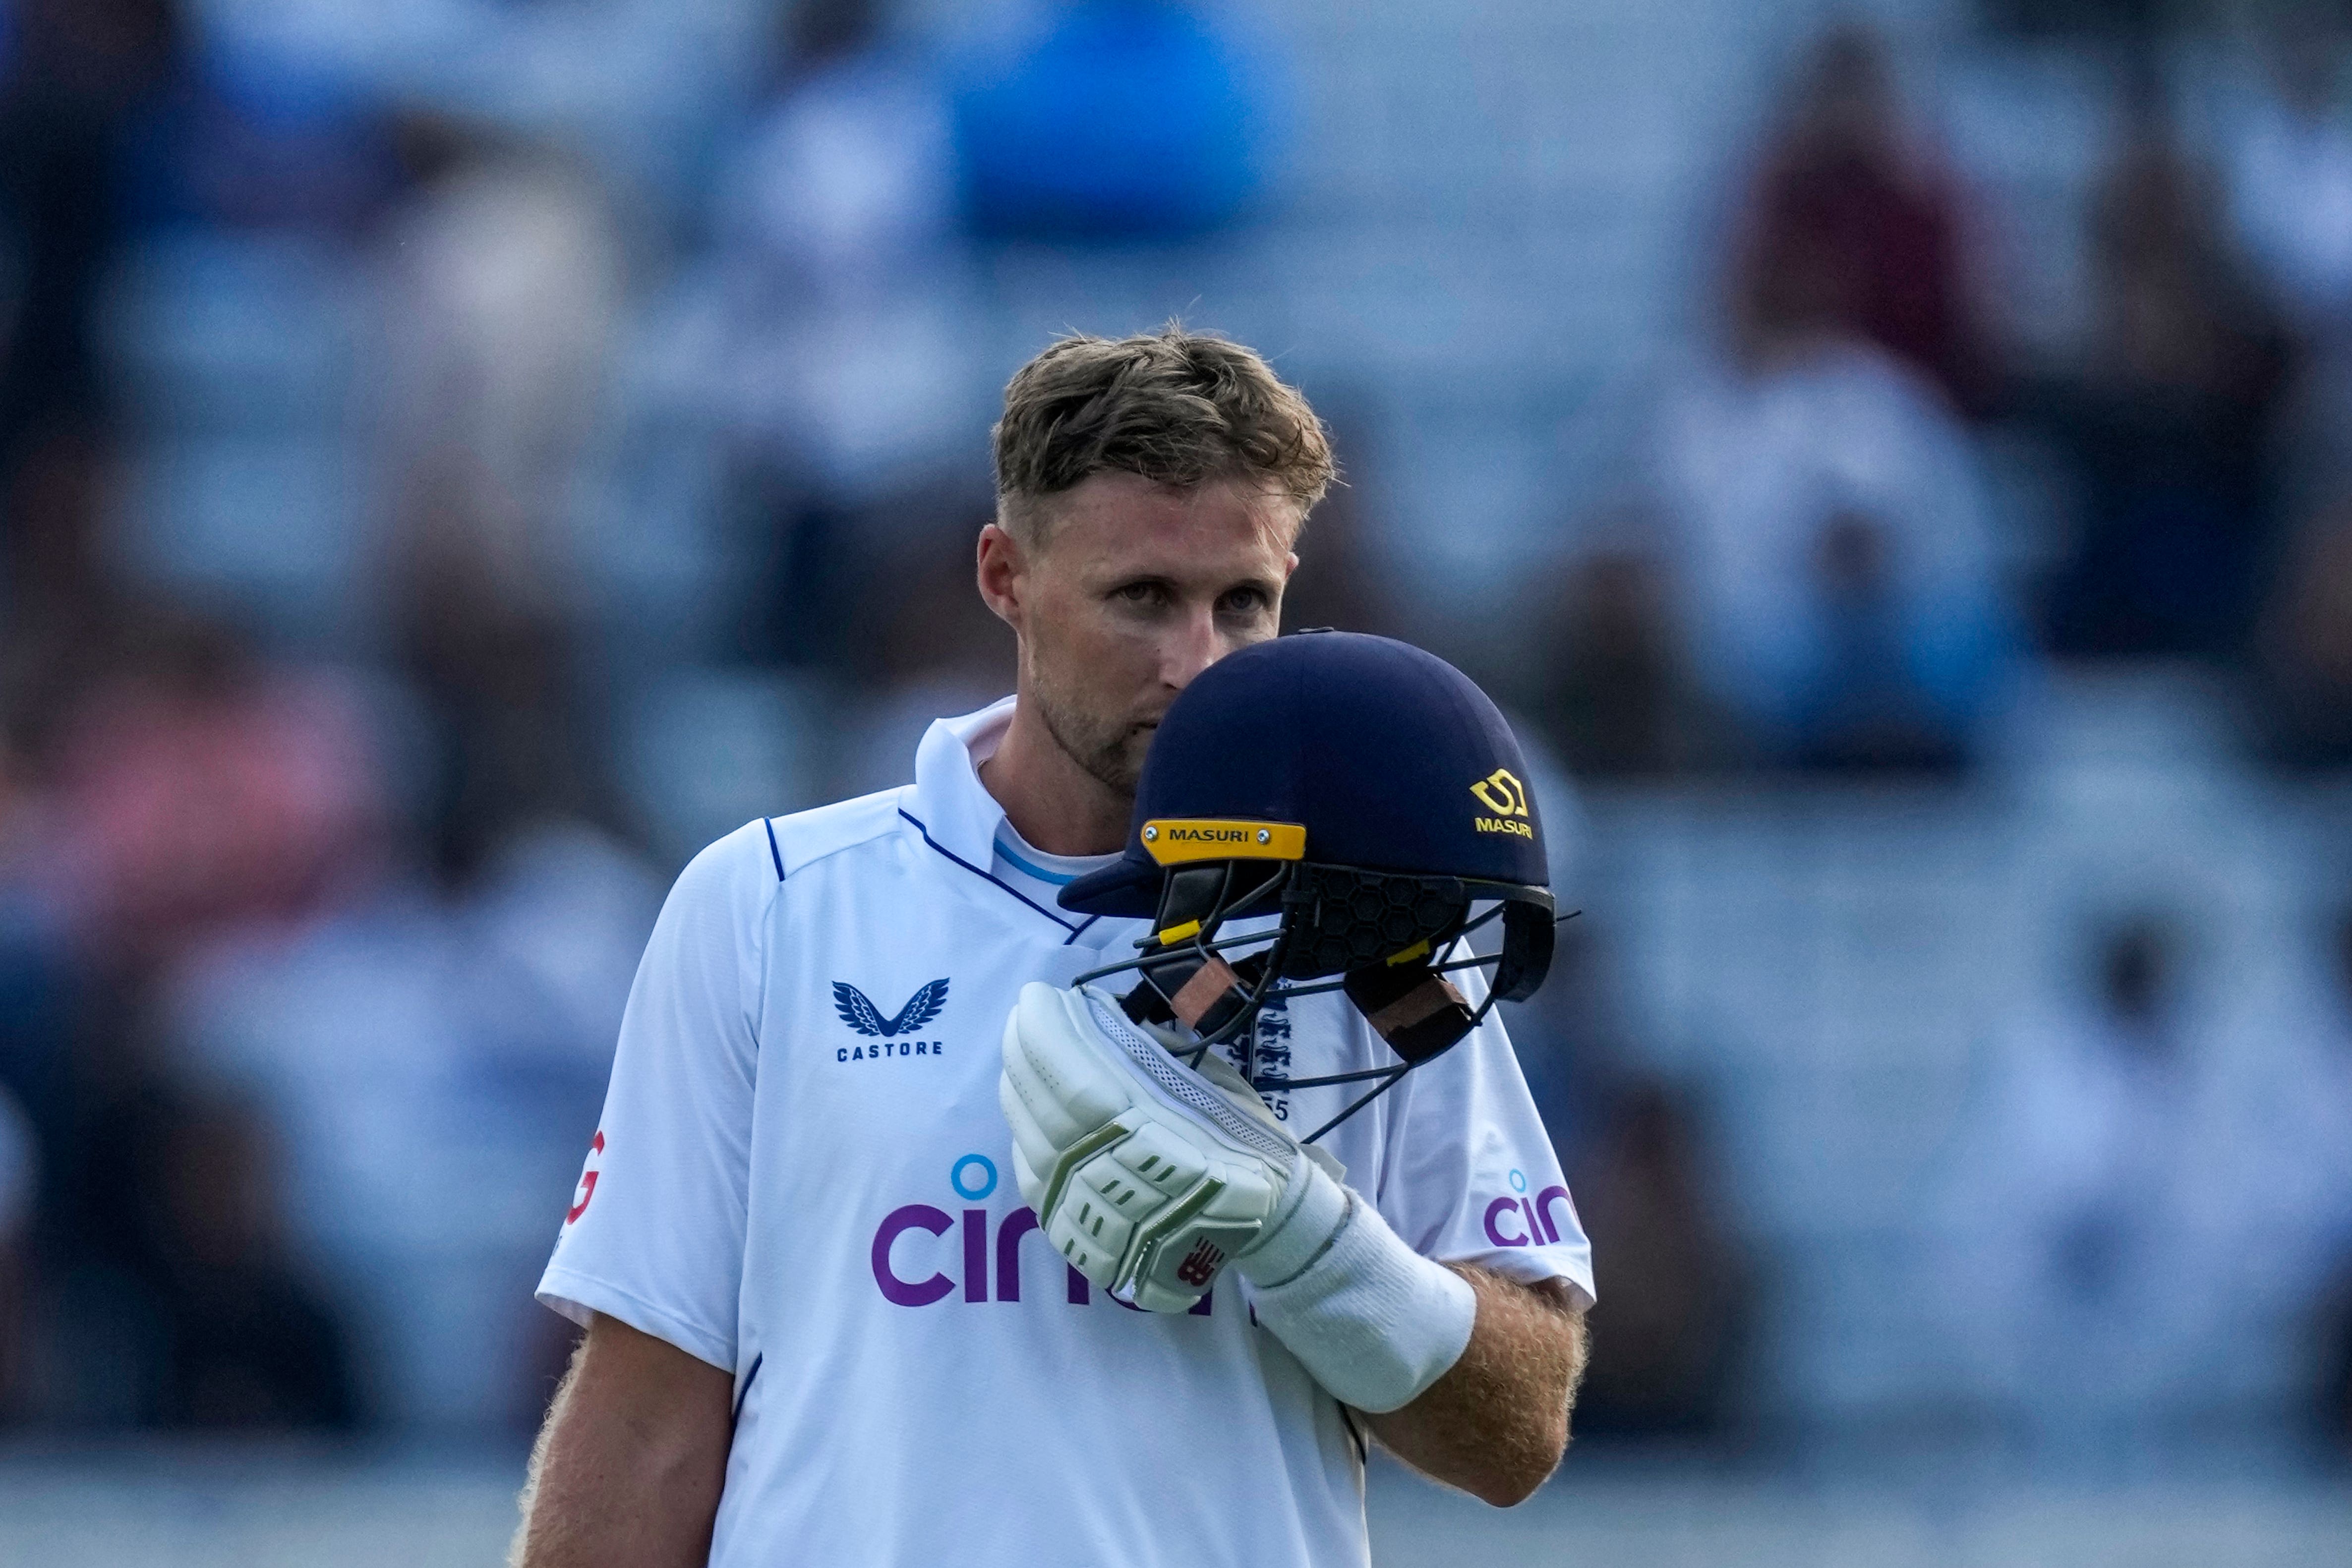 Joe Root ended the day on 106 not out